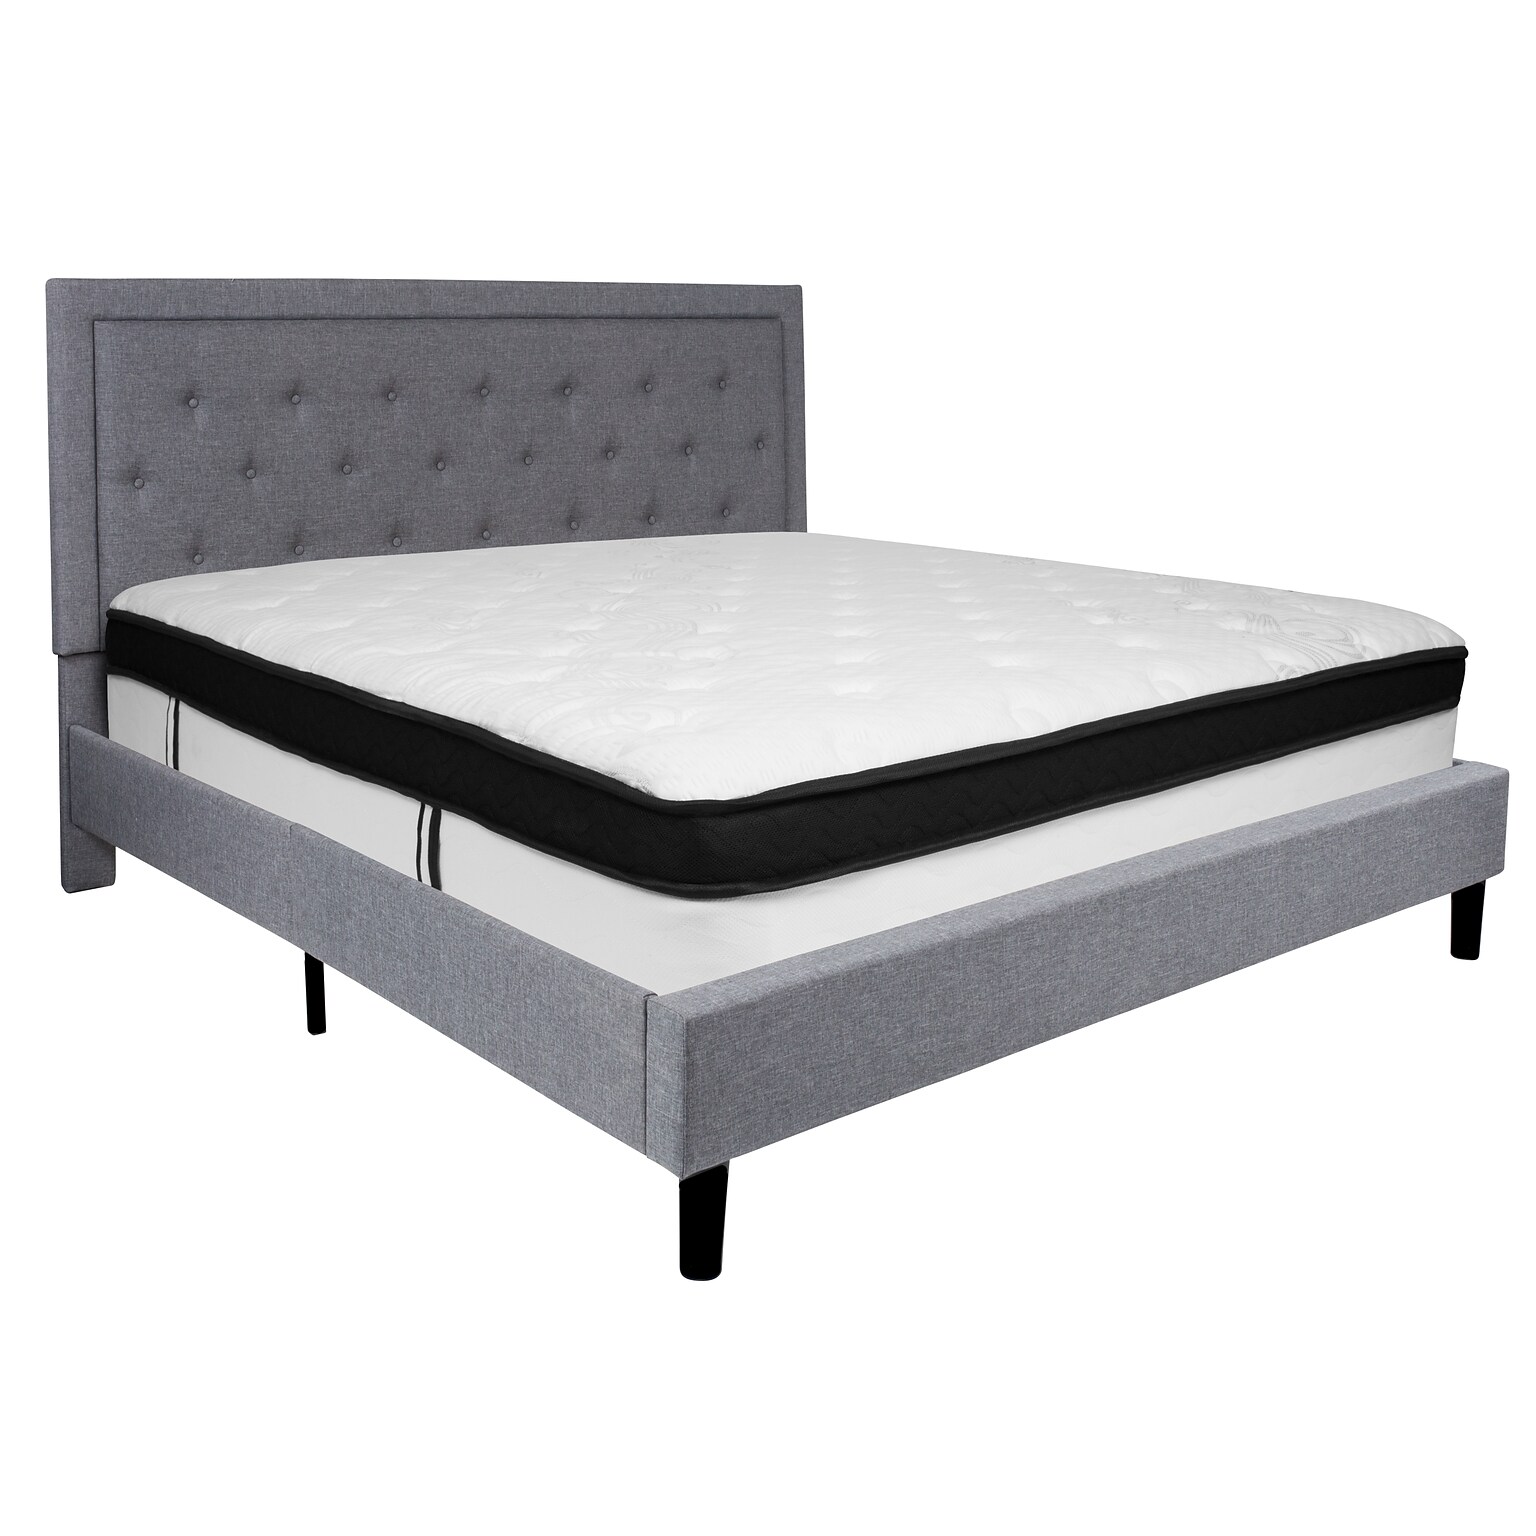 Flash Furniture Roxbury Tufted Upholstered Platform Bed in Light Gray Fabric with Memory Foam Mattress, King (SLBMF28)